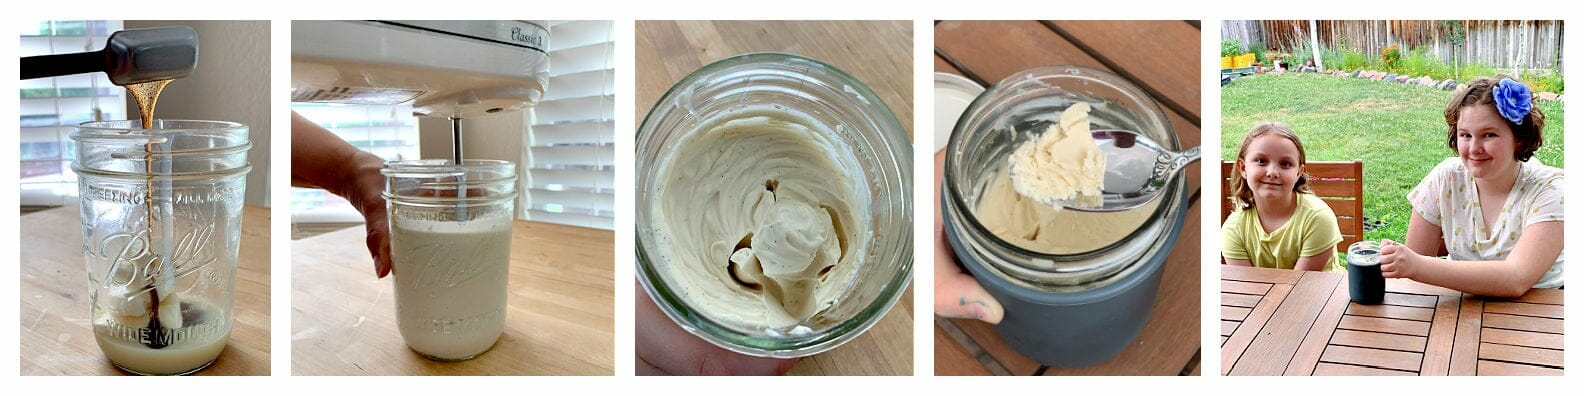 mason-jar-lifestyle-mason-jar-ice-cream-recipe-challenge-July-blog-post-2022-gray-wide-mouth-pint-silicone-sleeve-buttermilkbysam-creamy-rich-easy-homemade-with-kids